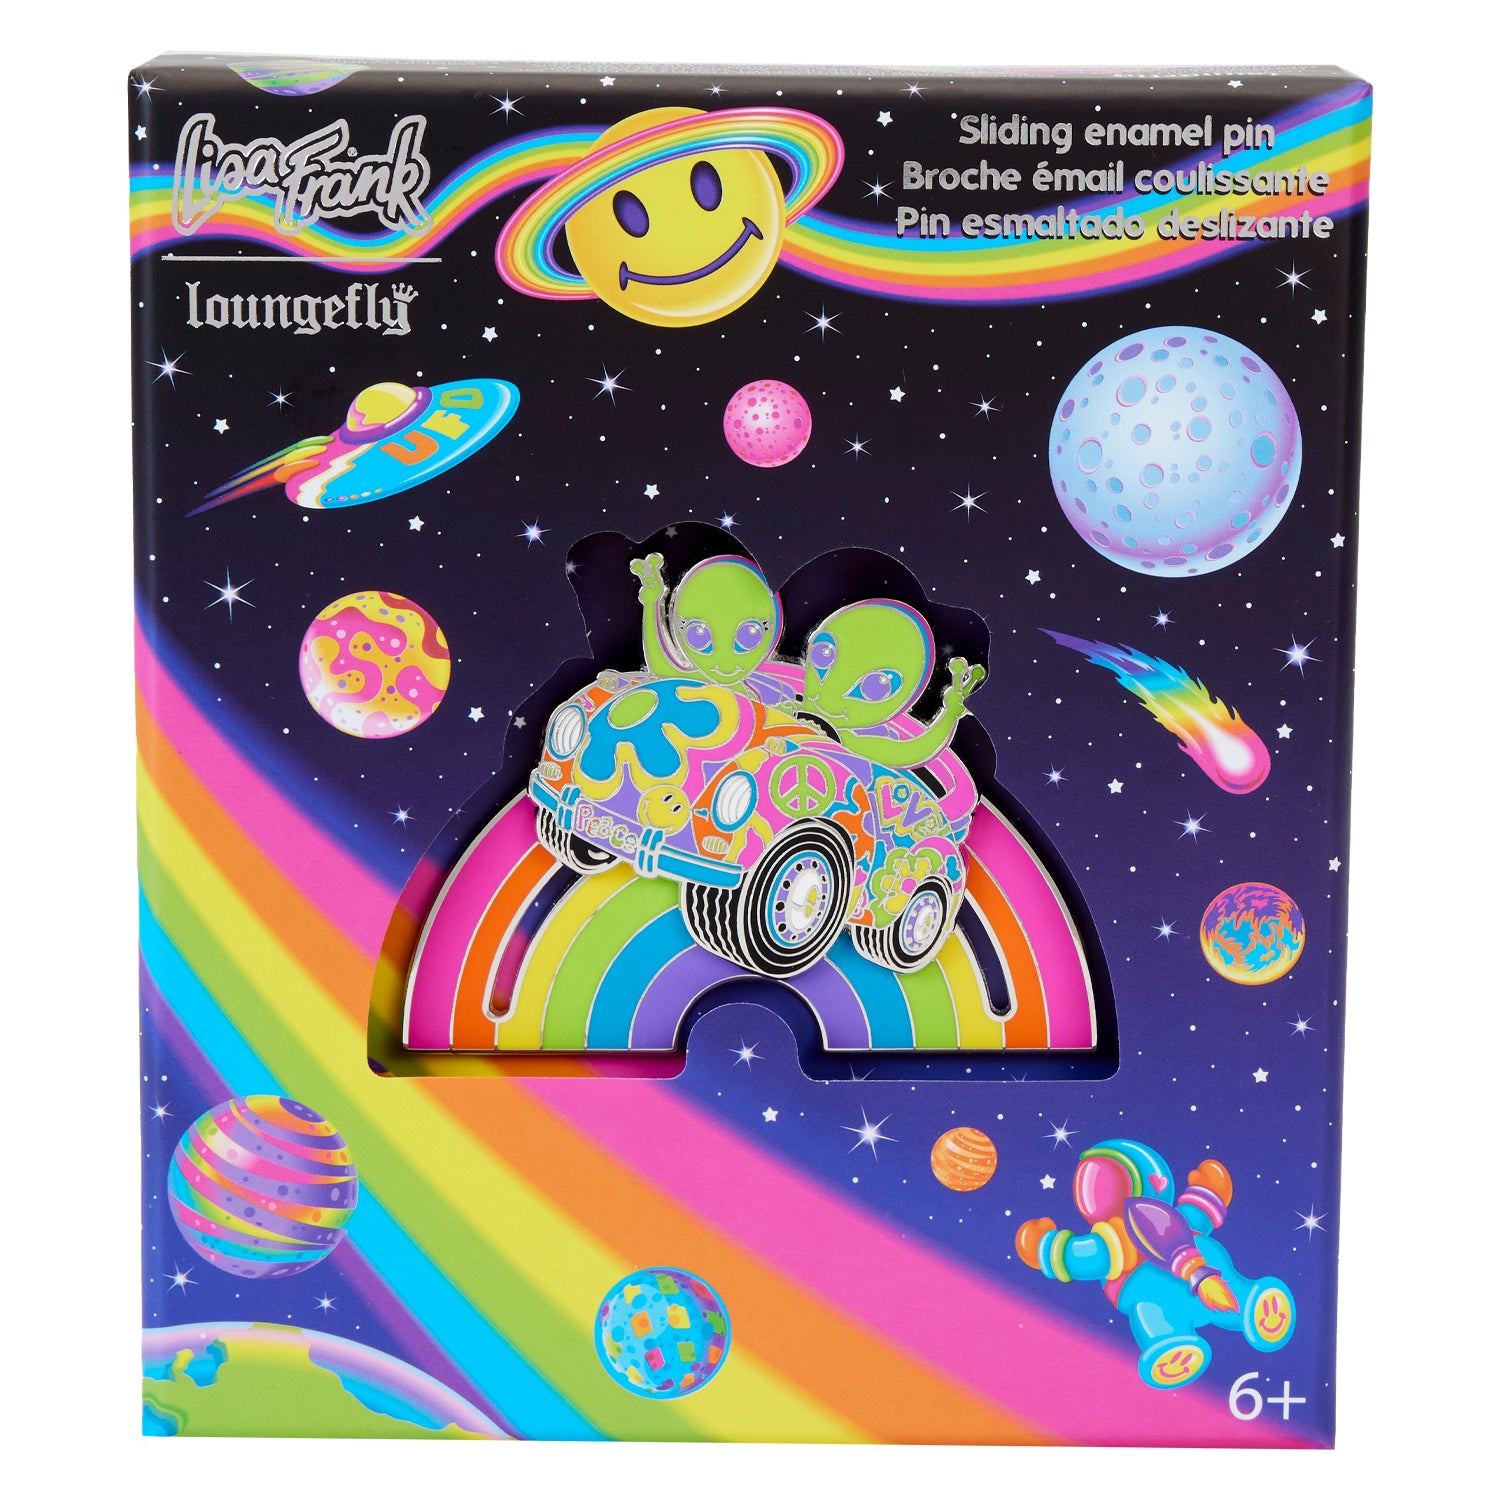 Loungefly Lisa Frank Zoomer & Zorbit 3" Limited Edition Collector Box Pin